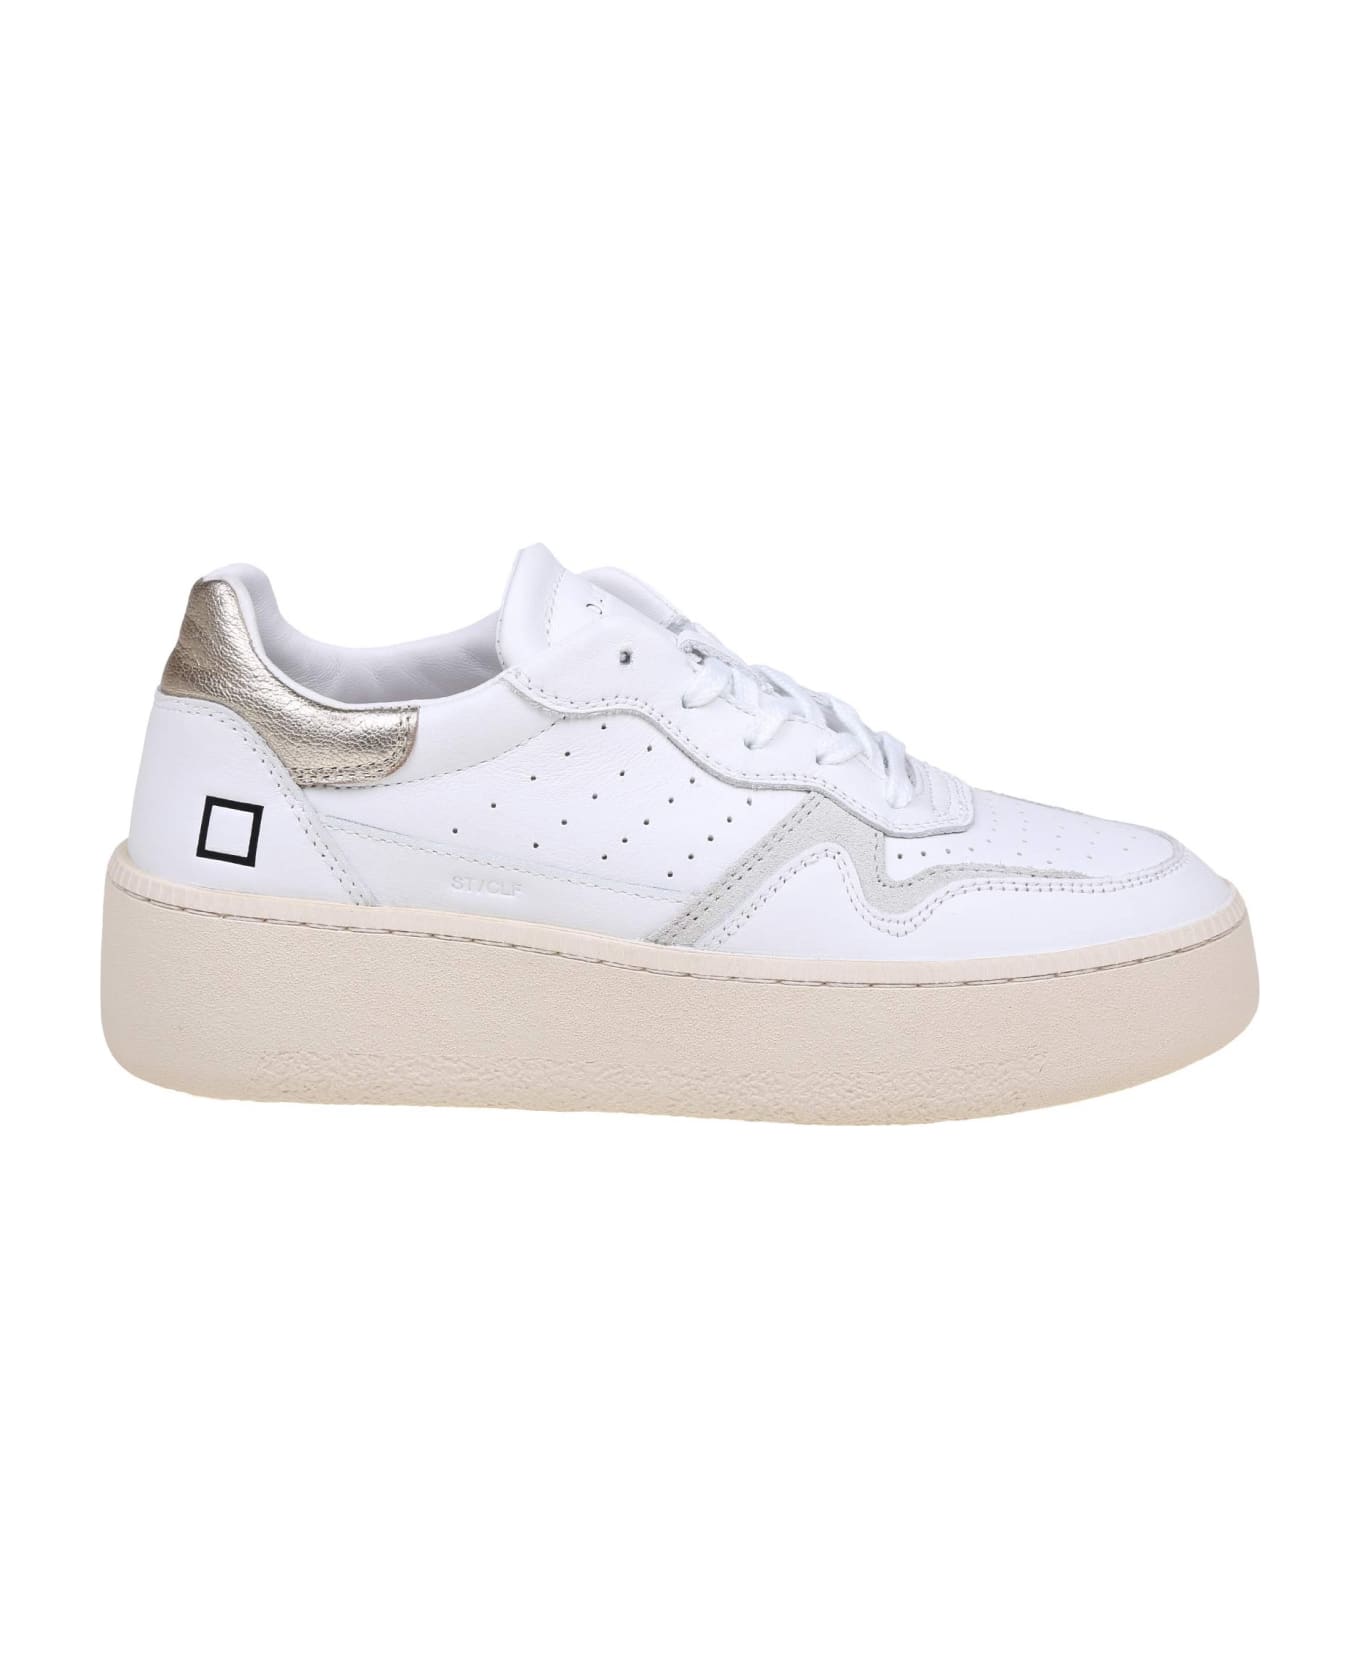 D.A.T.E. Step Sneakers In White Leather - platinum ウェッジシューズ